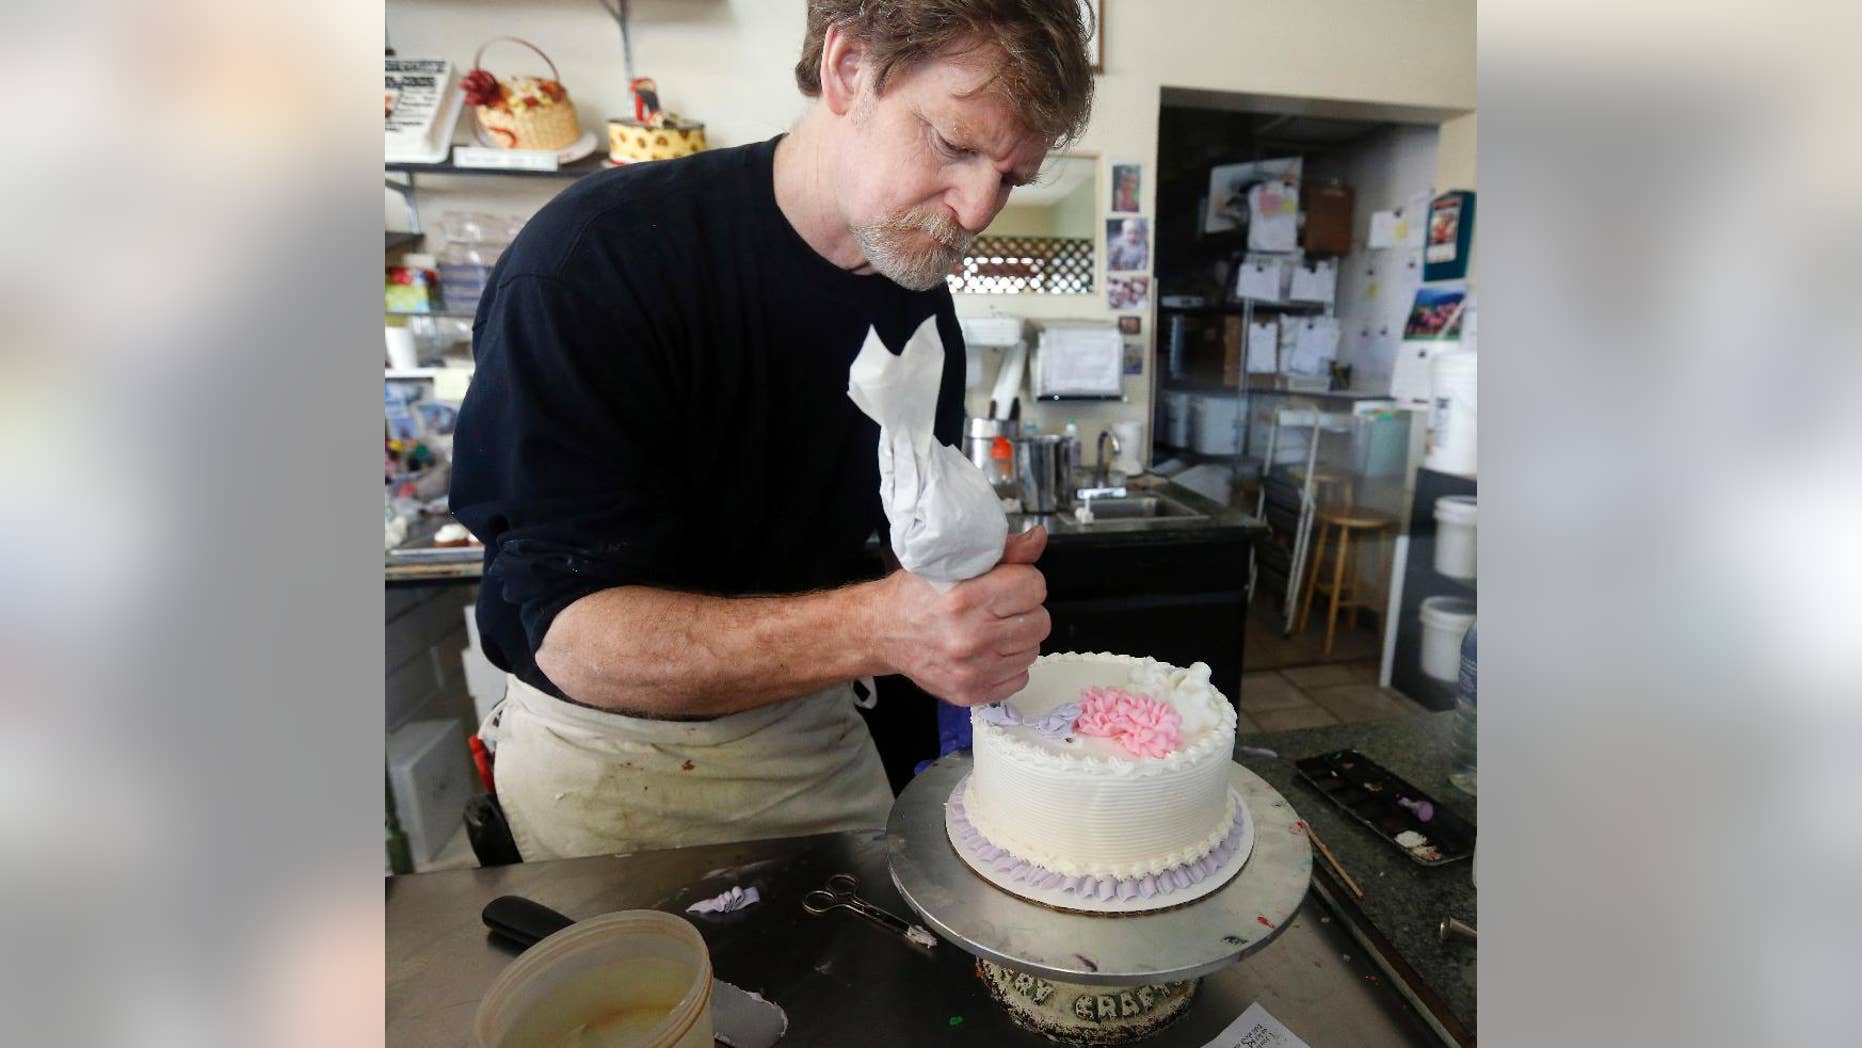 The Good: Colorado’s second case against Masterpiece Cakeshop and Jack Phillips crumbles C3b5213d028040c2945132f8f2a80ace-34024